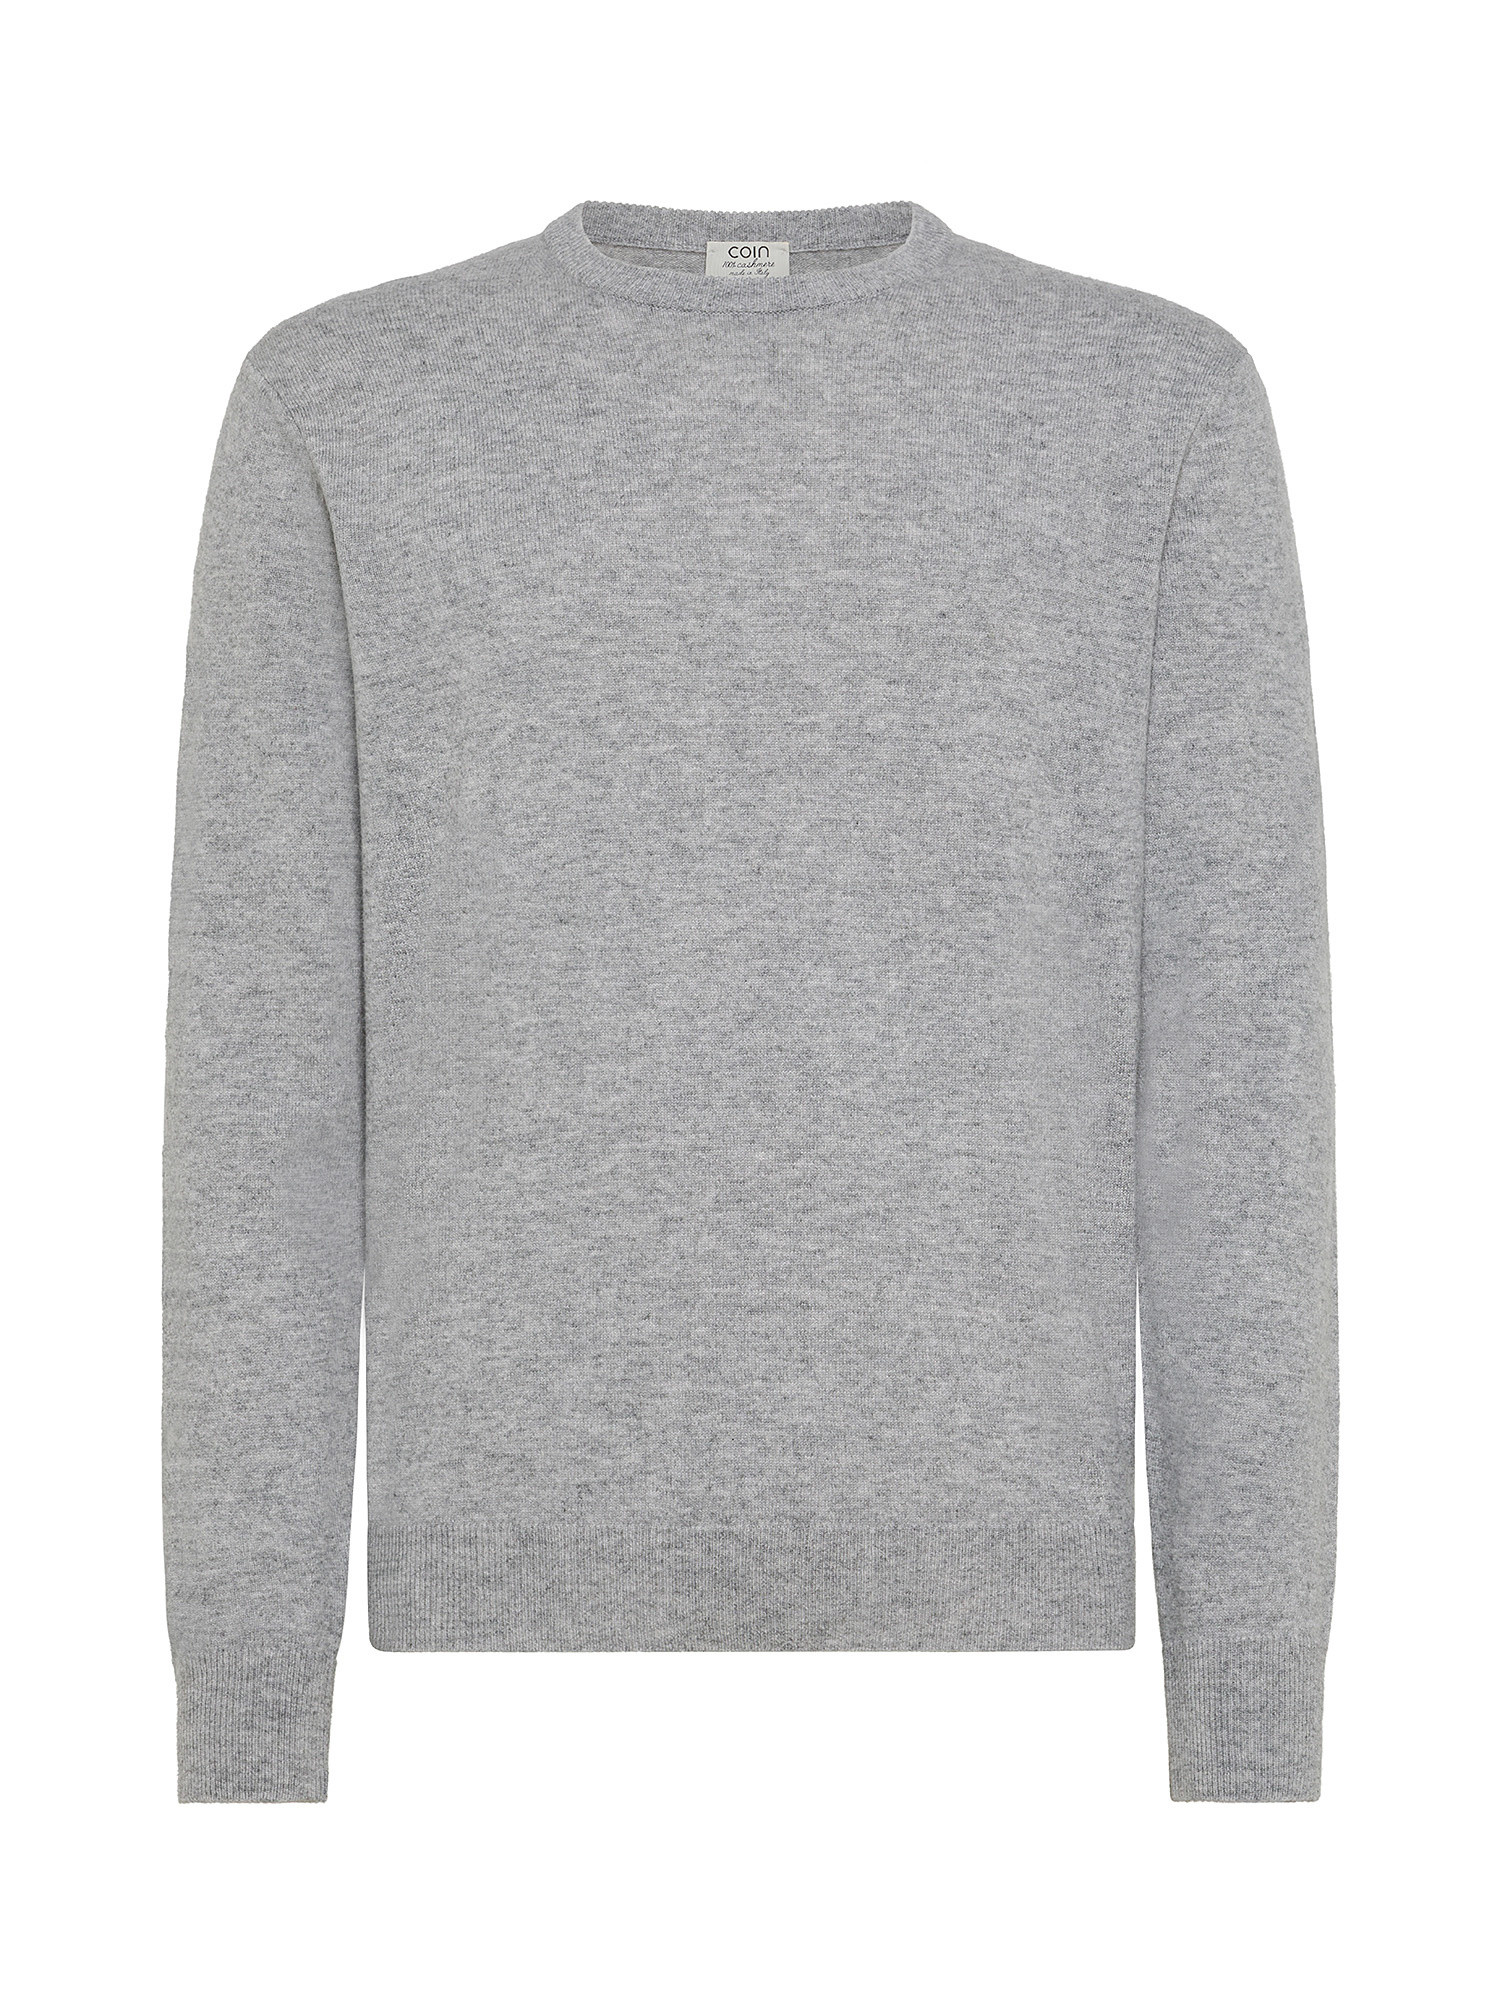 Coin Cashmere - Crewneck sweater in pure premium cashmere, Light Grey, large image number 0